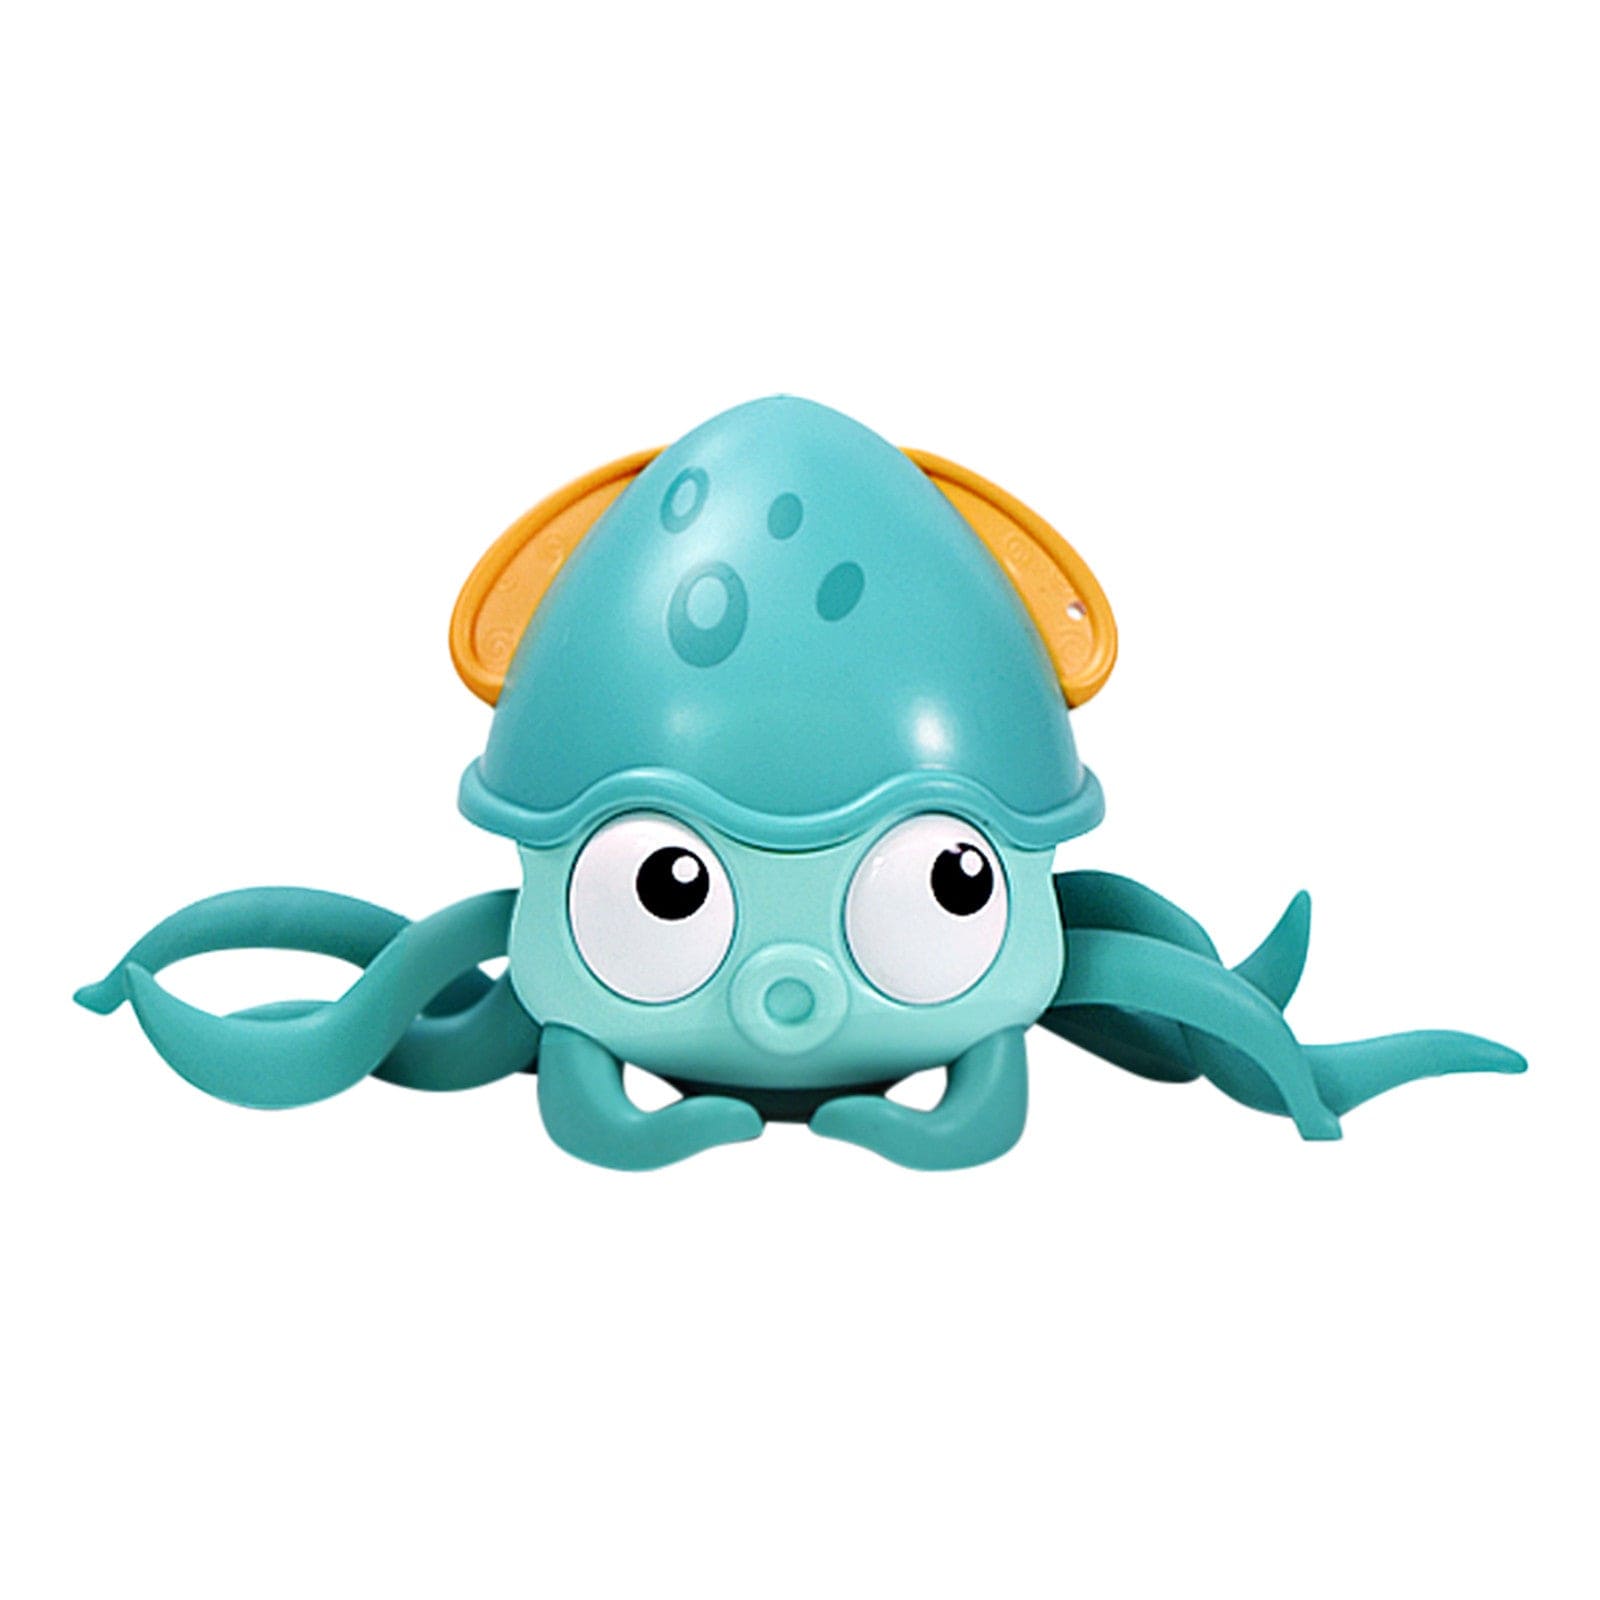 Cute Octopus Toys For Children - www.mytooluse.com